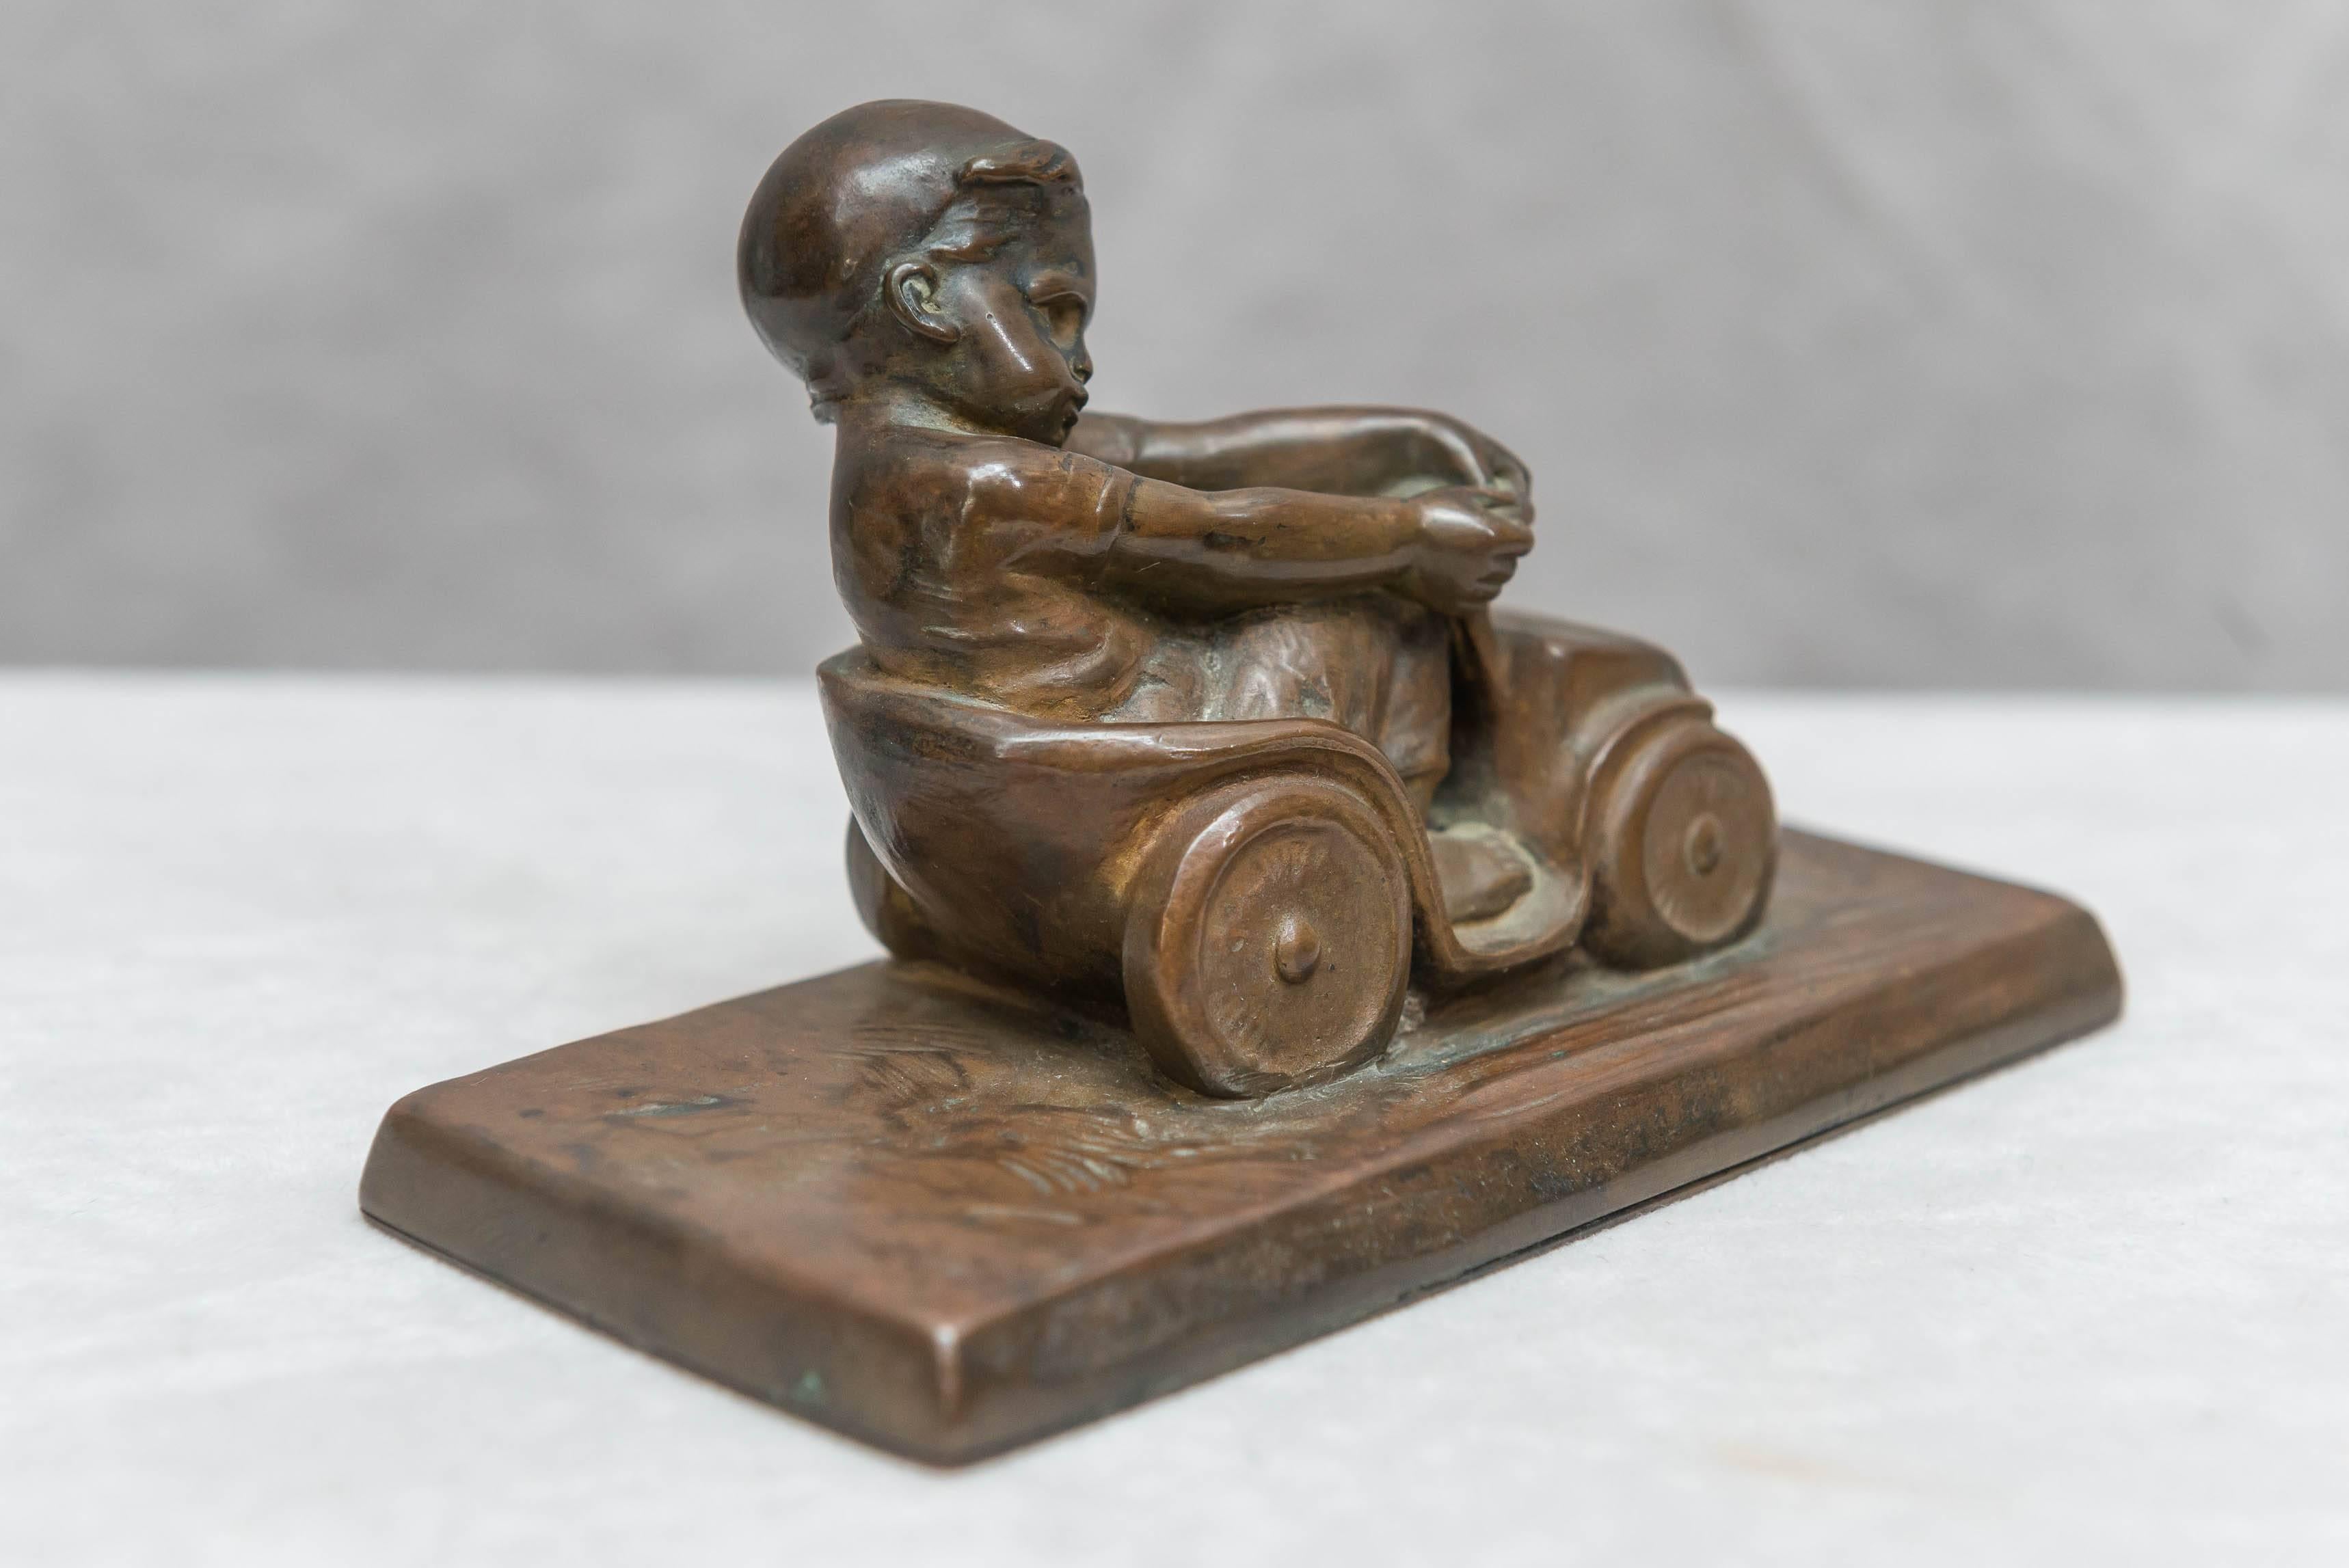 Patinated Bronze Figure of a Little Boy in a Toy Car, Artist Signed Tereszczuk, circa 1910